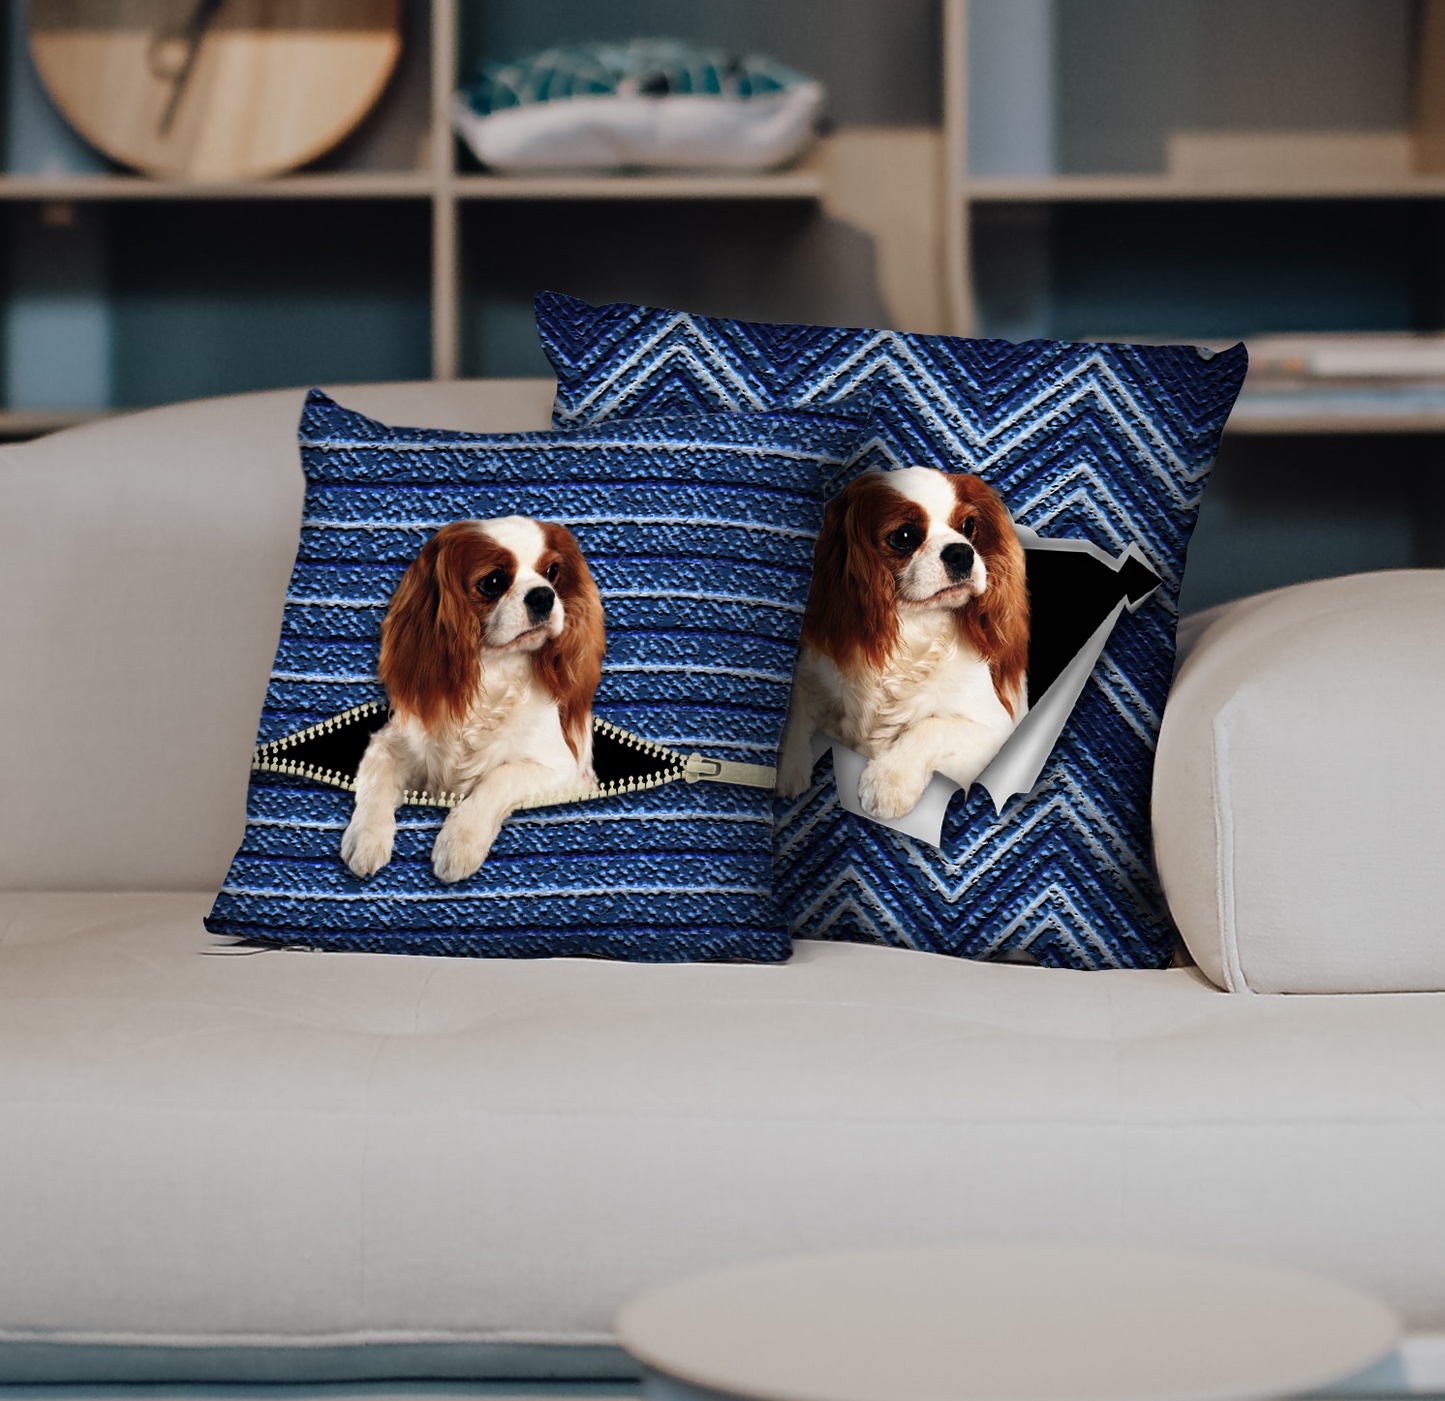 They Steal Your Couch - Cavalier King Charles Spaniel Pillow Cases V1 (Set of 2)